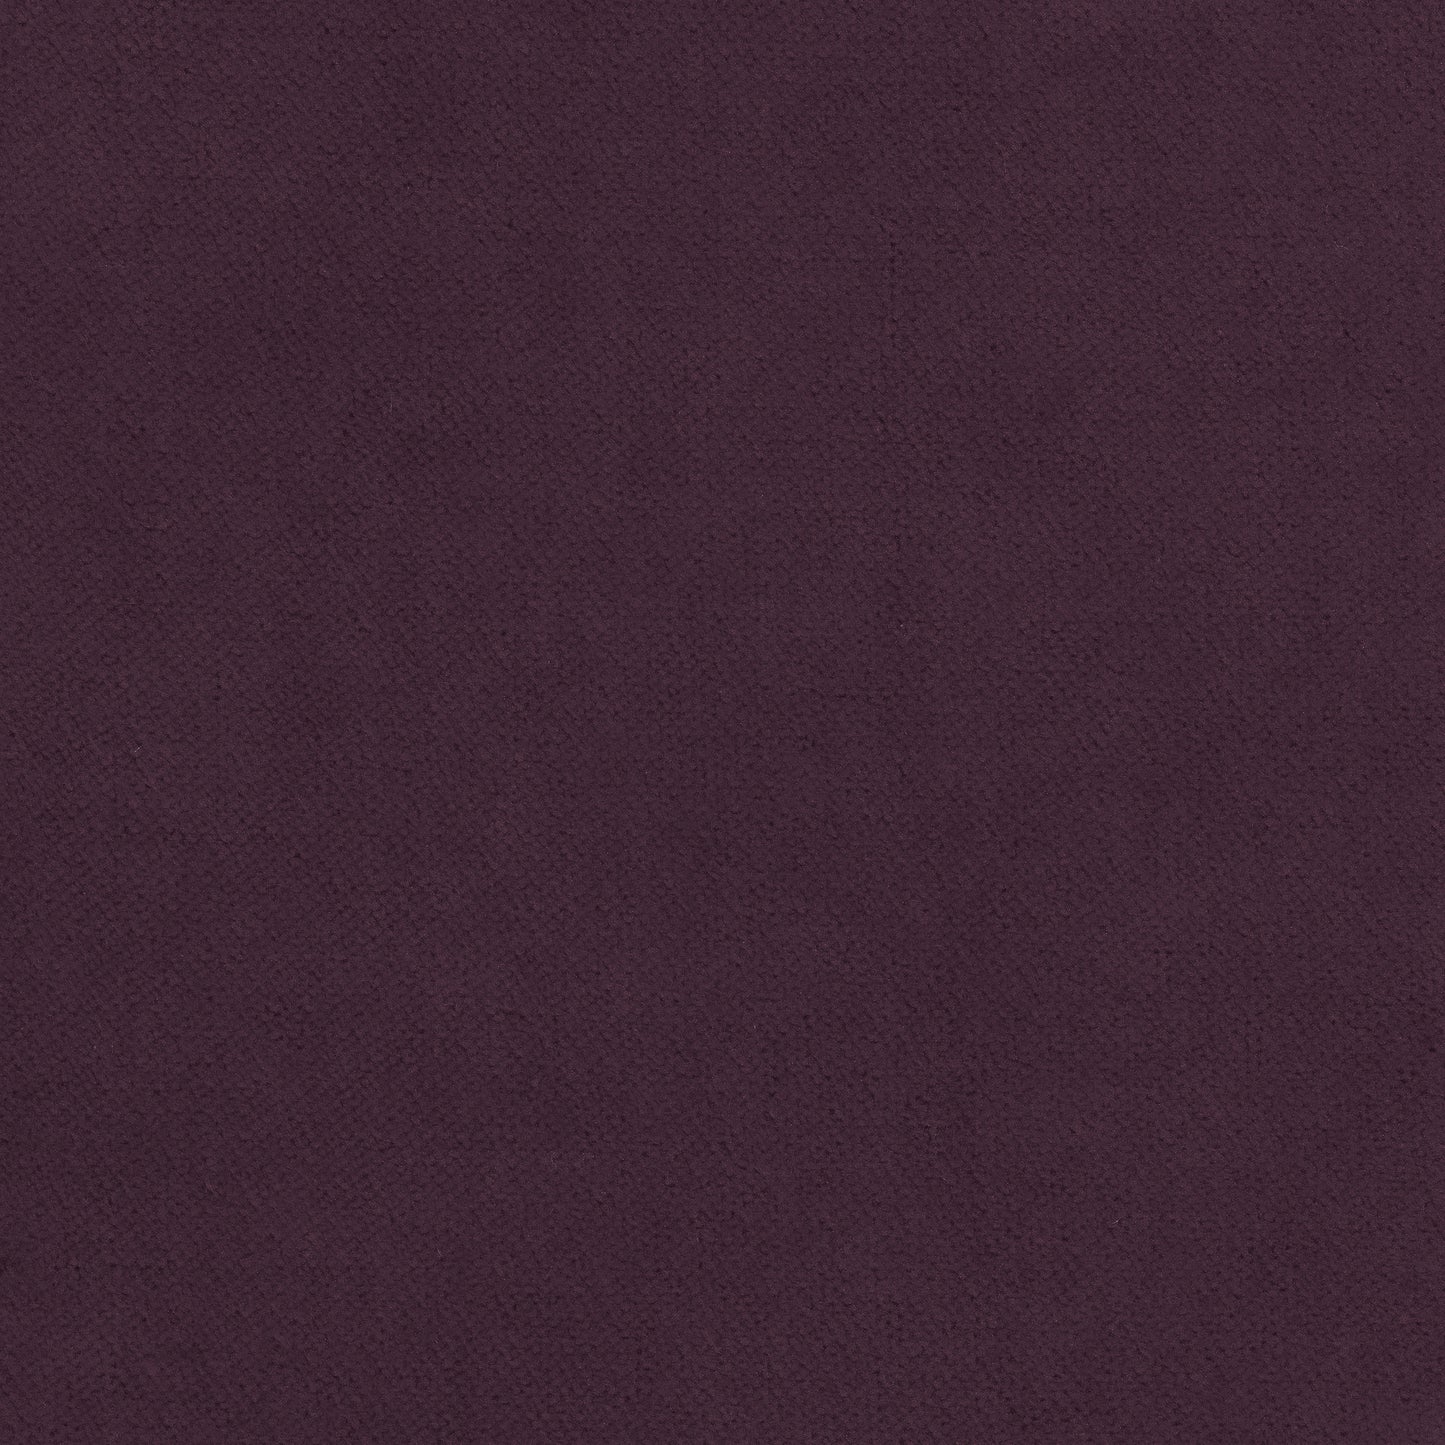 Purchase Thibaut Fabric Item# W7212 pattern name Club Velvet color Amethyst